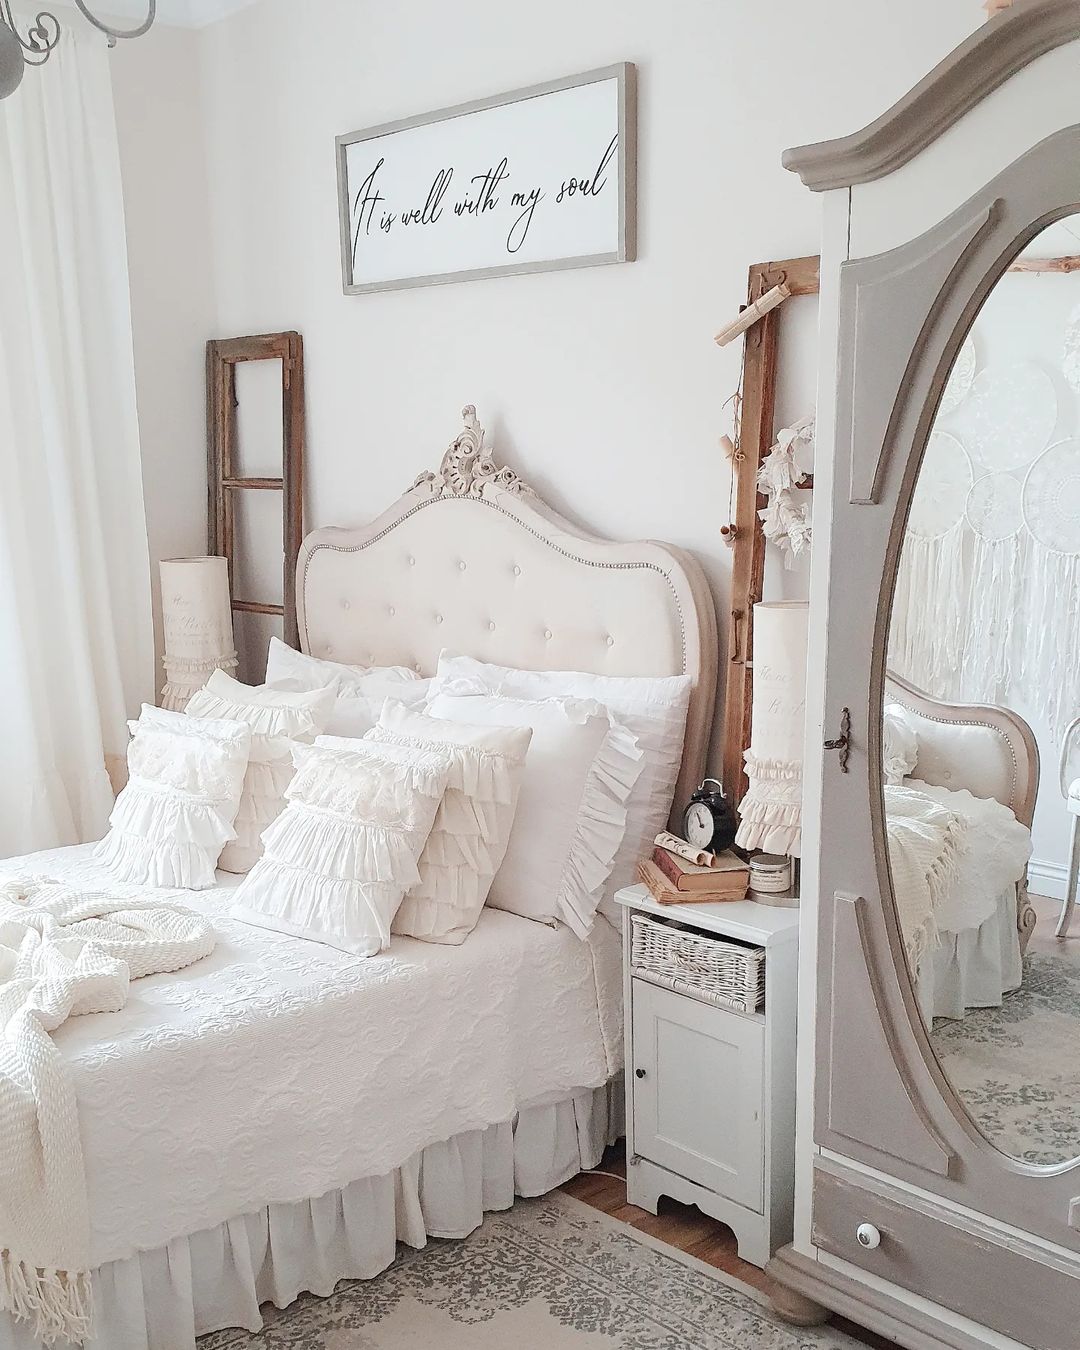 Creating a Relaxing Farmhouse Bedroom Retreat